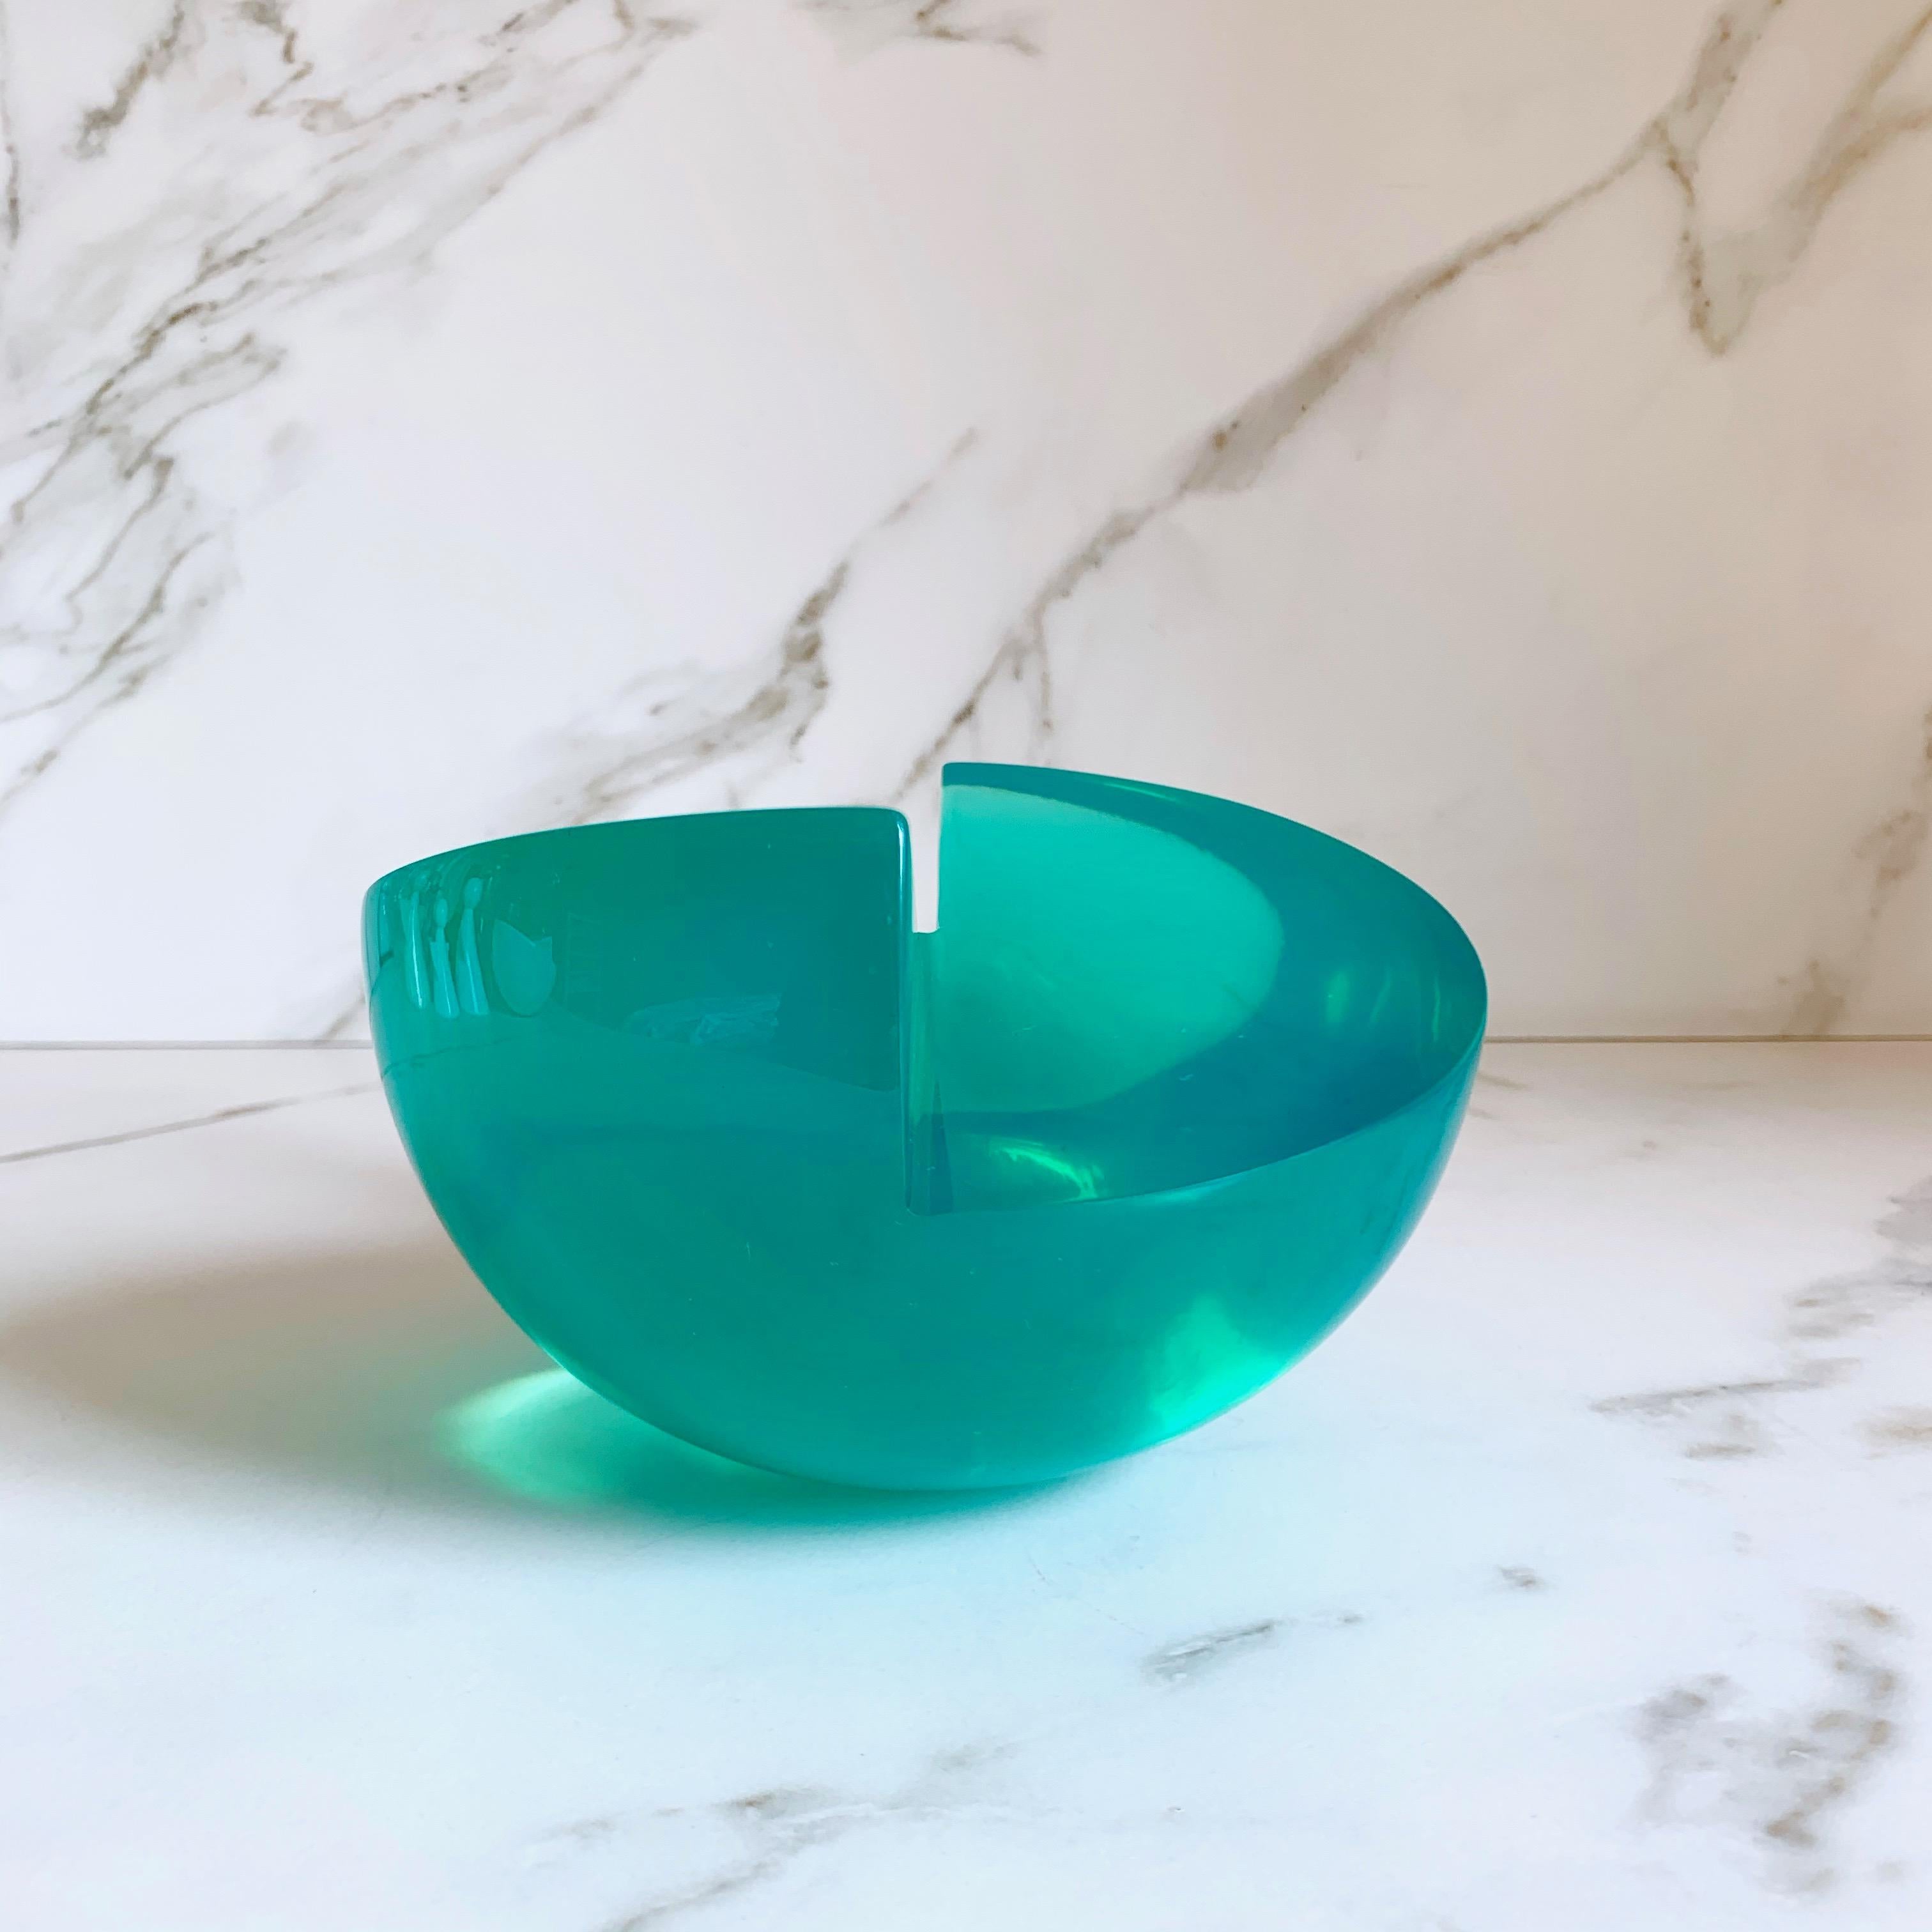 This Geometric sculpture is handmade in polished resin in a variety of colors. It is a modern and colorful piece that will liven up any space.

Our Semi Sphere is a very cool and fun piece! It can be transformed into a complete sphere when you